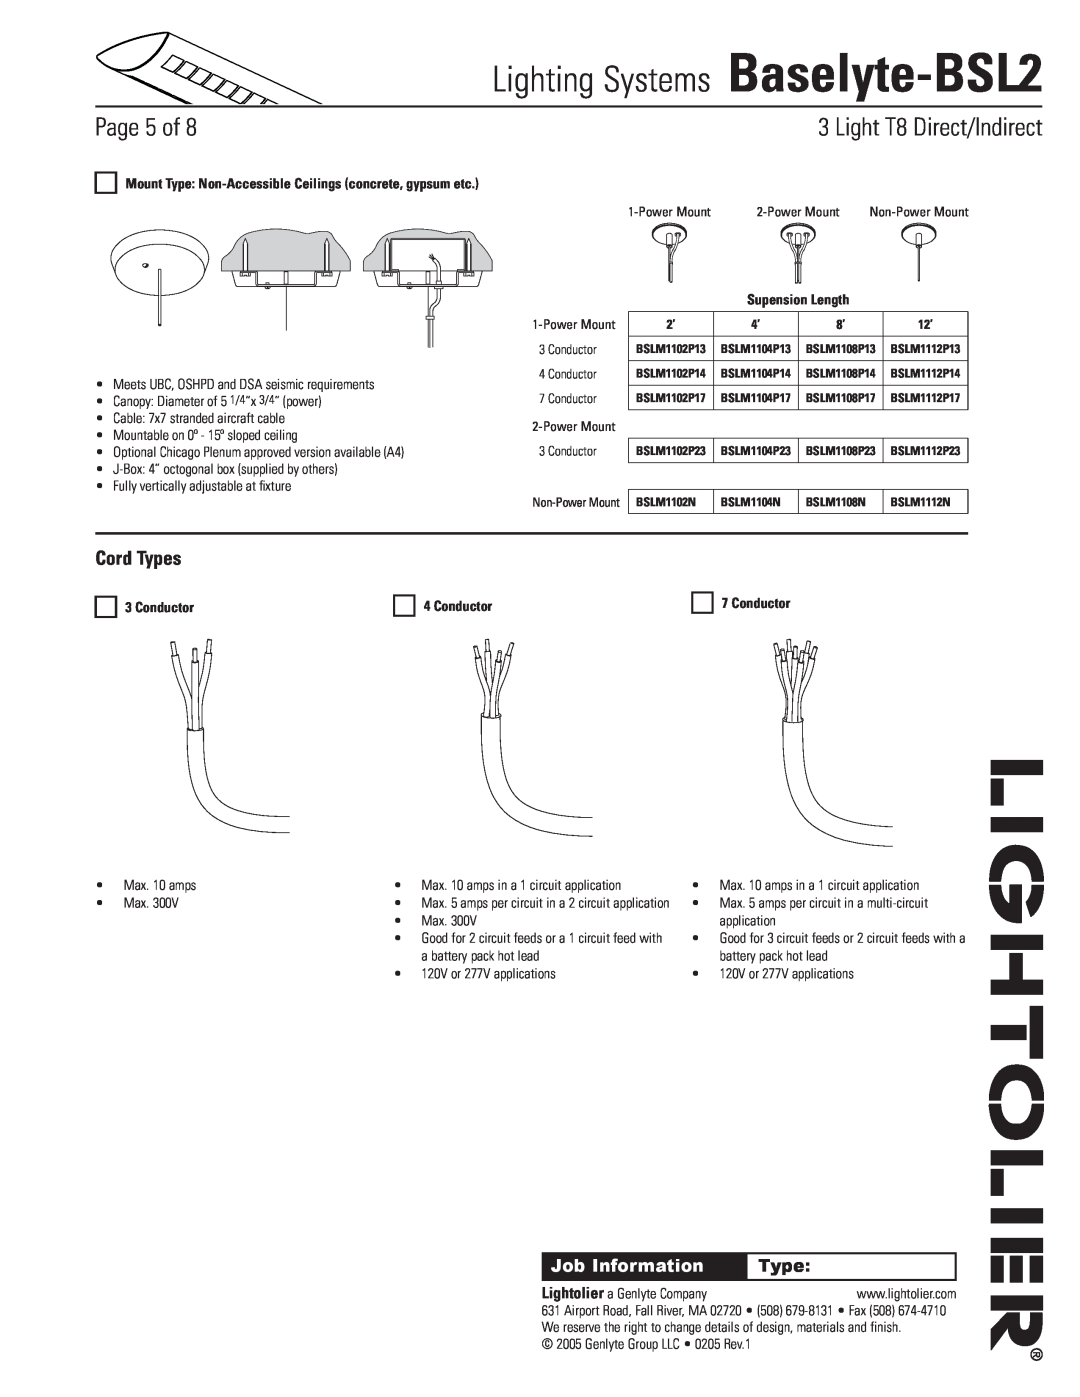 Lightolier Cord Types, Conductor, Lighting Systems Baselyte-BSL2, Page of, Light T8 Direct/Indirect, Job Information 